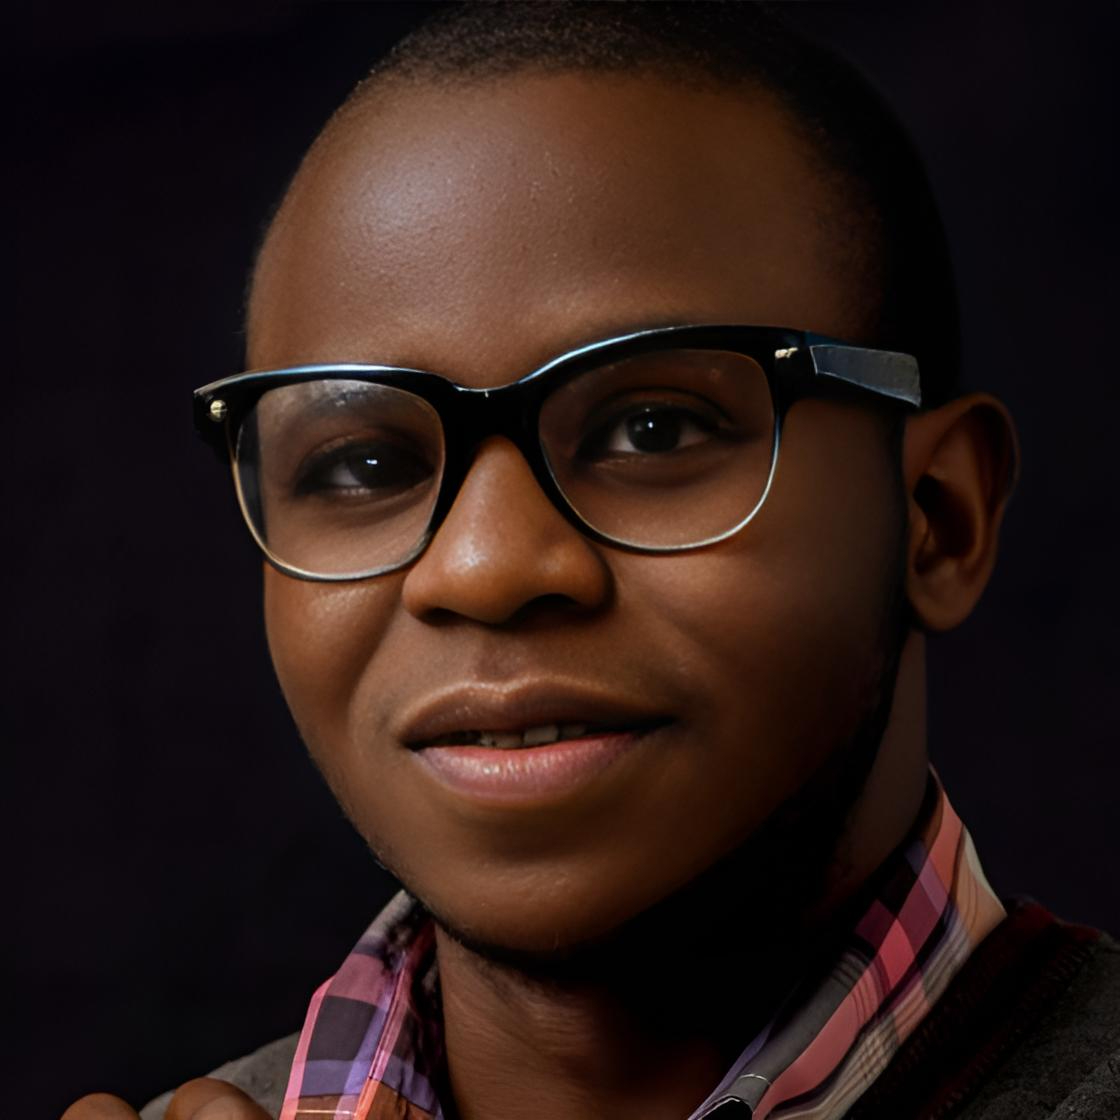 Joshua Omale: Throughout the month, I’ll be sharing stories, insights, and tips on childhood cancer advocacy